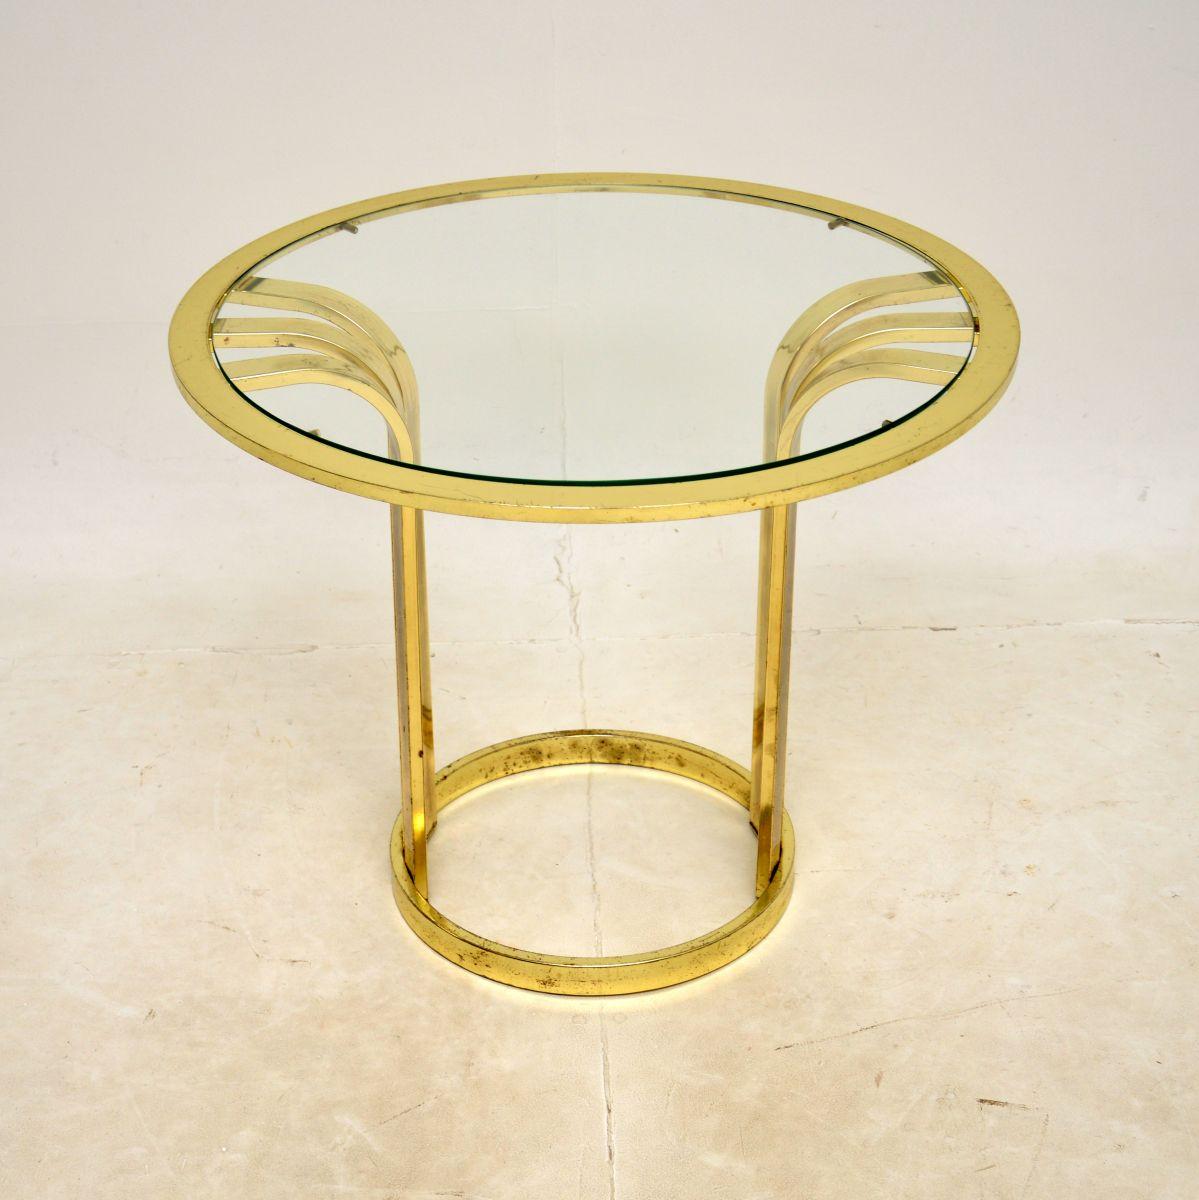 A beautiful vintage Hollywood regency style coffee / side table in brass. This was made in England, it dates from the 1970’s.

It is extremely stylish and is a great size, perfect for use as a coffee table or an occasional side table.

The condition